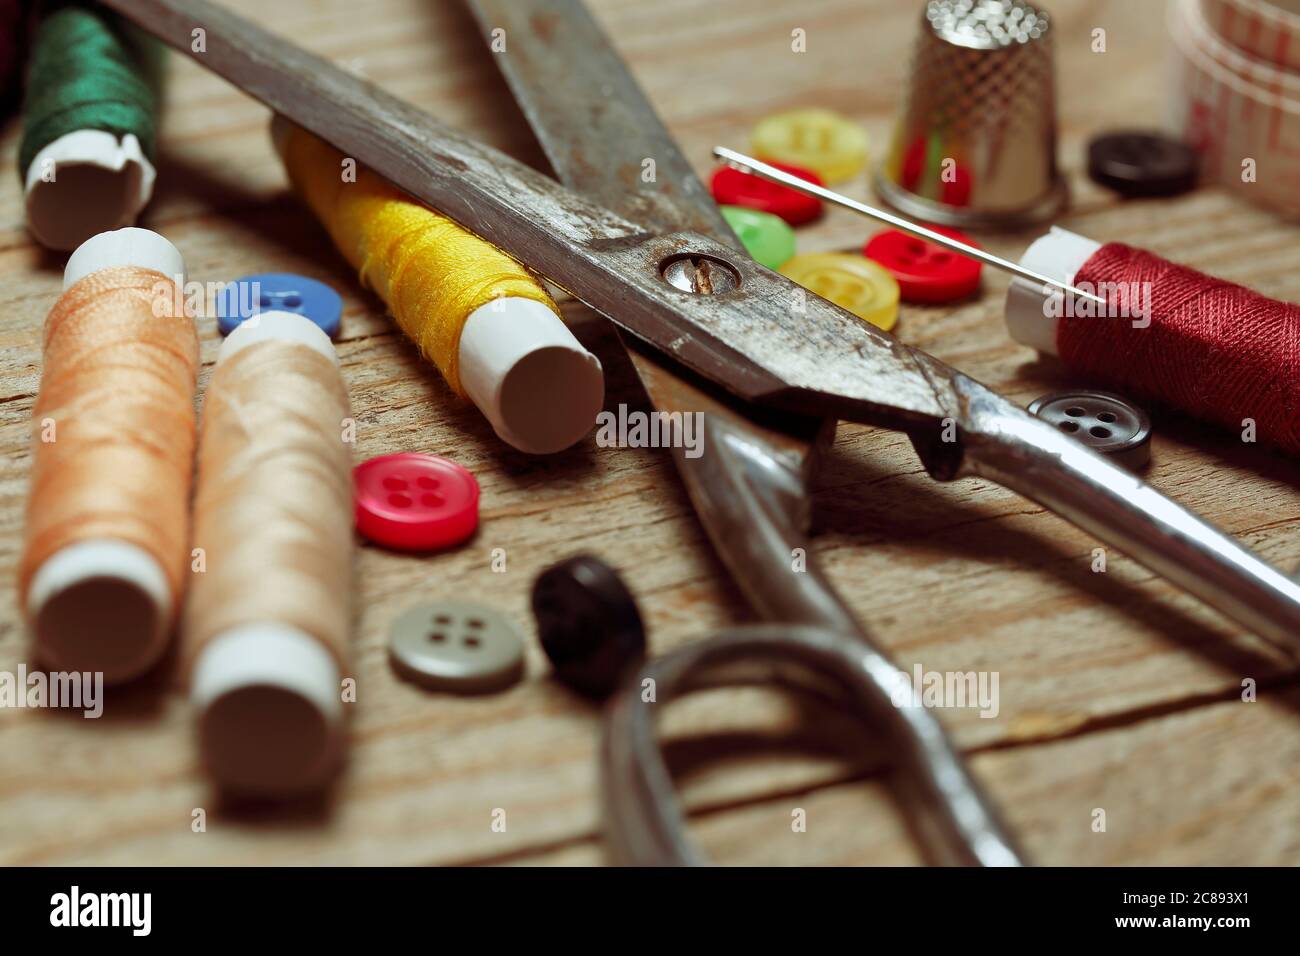 Various Sewing Accessories and Tools Green Shades Stock Photo - Image of  needlework, scissors: 91718416